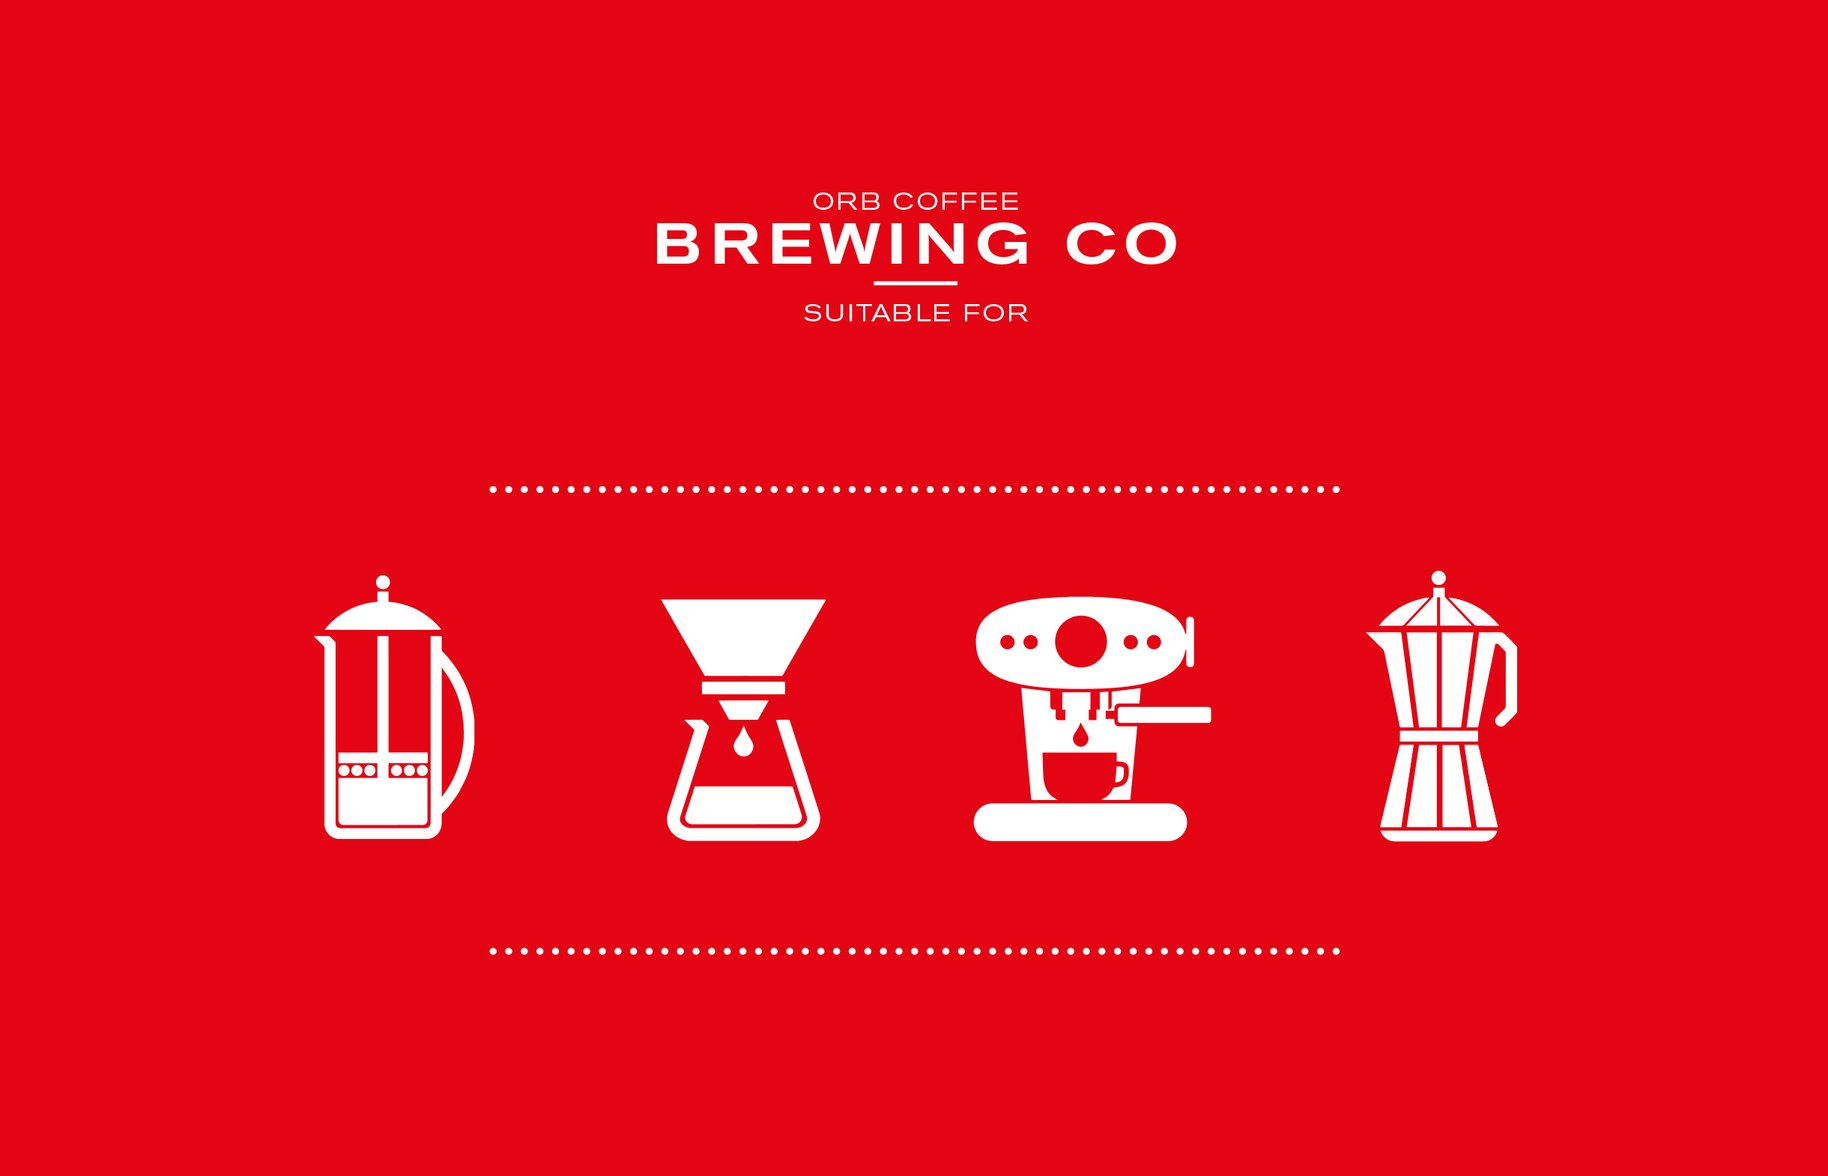 Orb Coffee brewing icons 